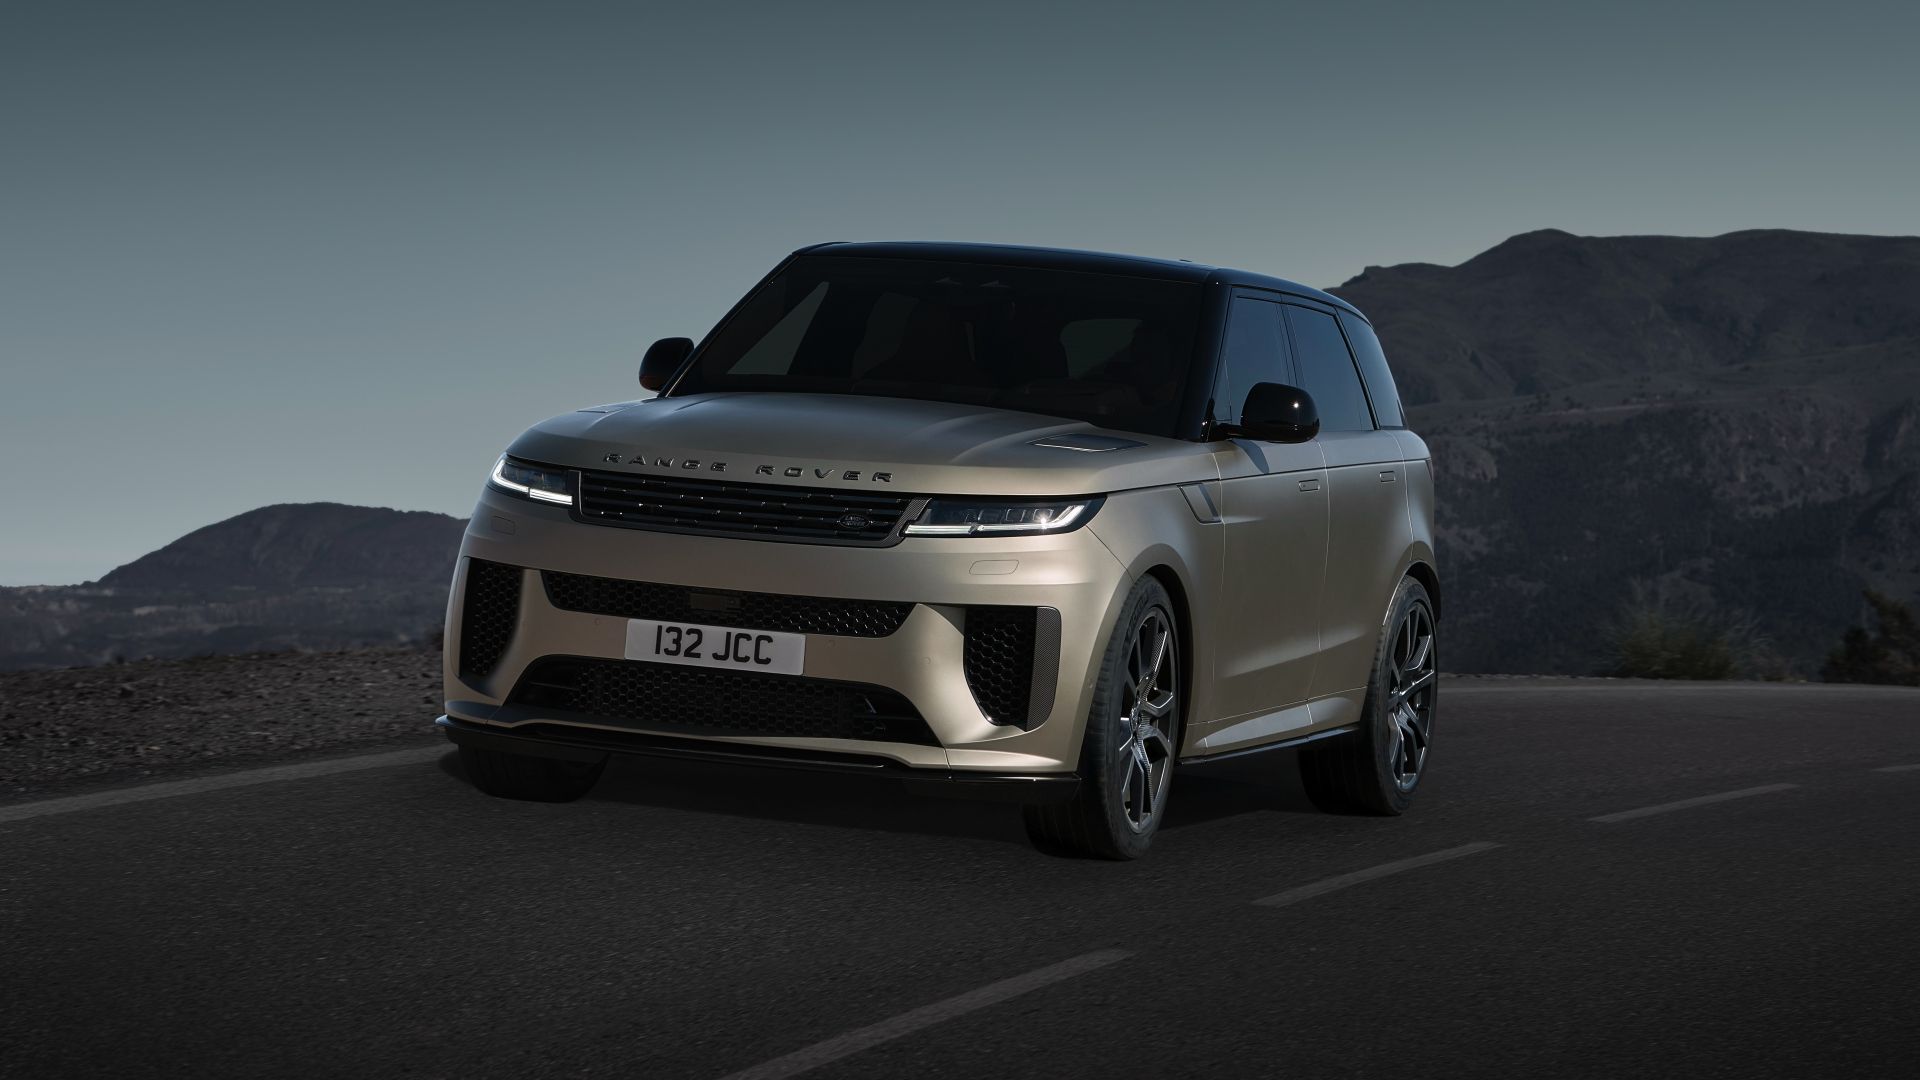 How Much Is a 2021 Range Rover? | 2021 Range Rover Price & Cost